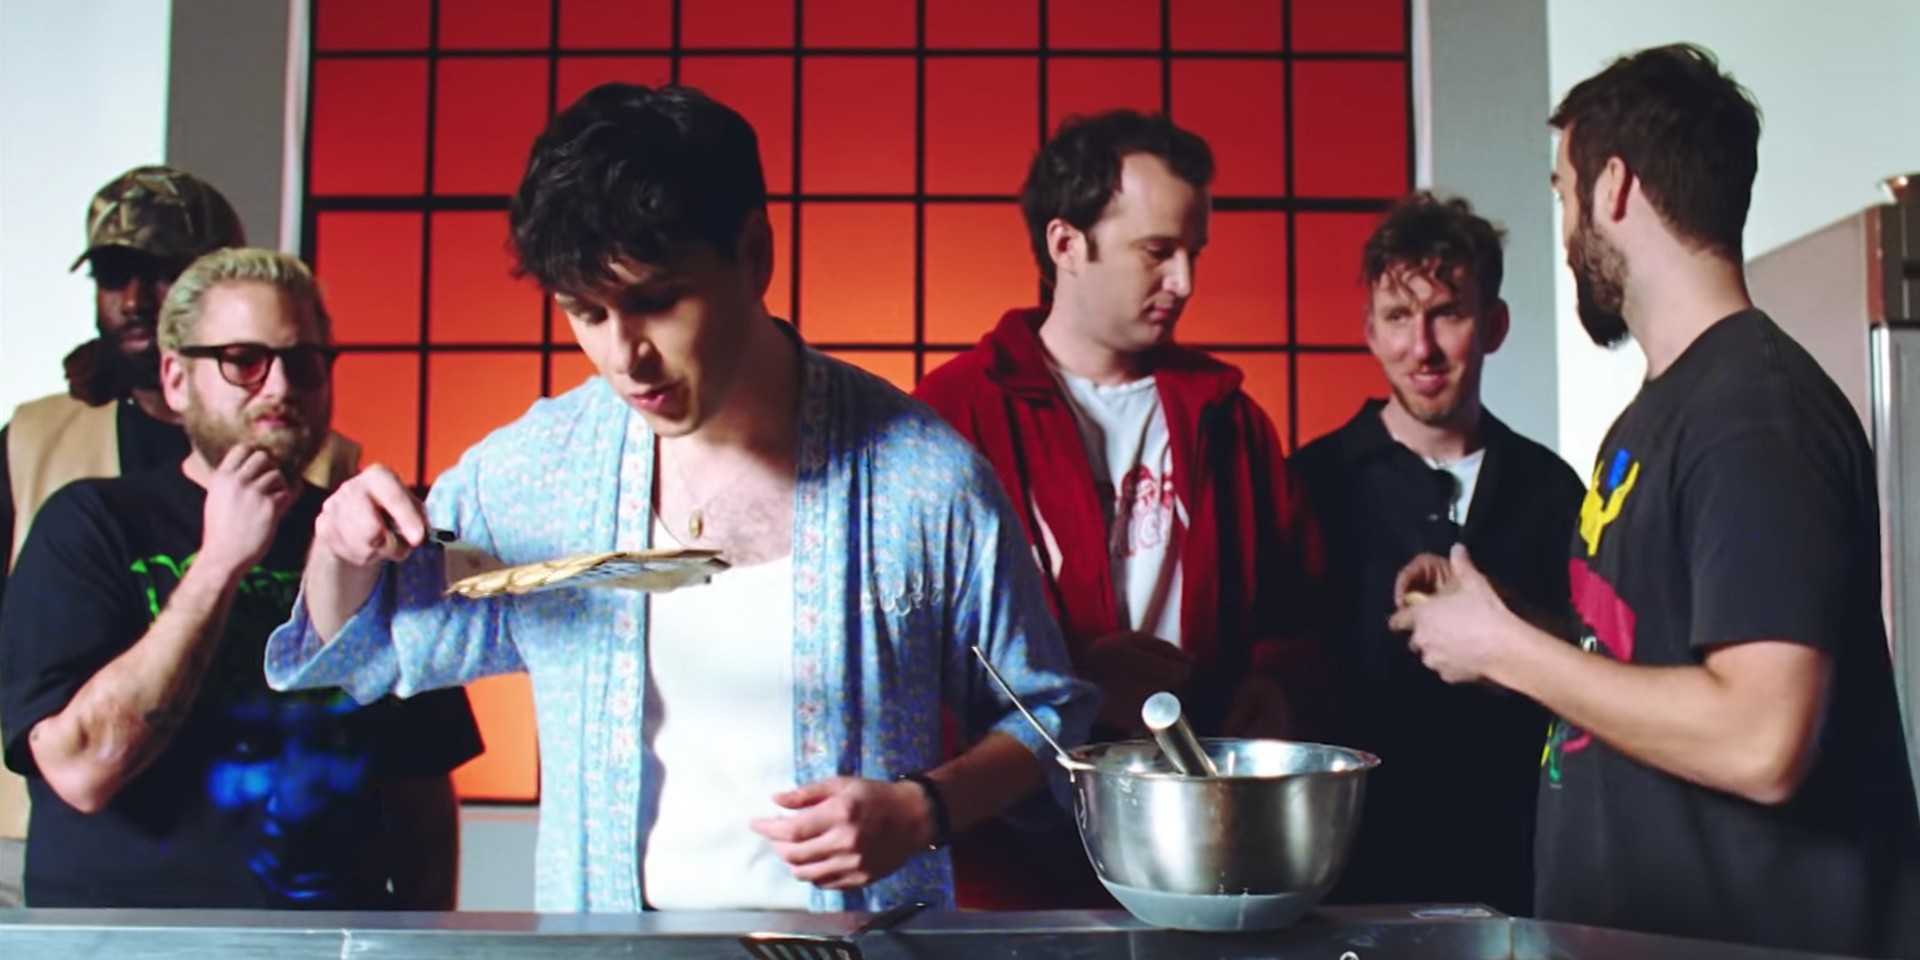 Vampire Weekend's Ezra Koenig flips pancakes masterfully for Jonah Hill and friends in music video for 'Harmony Hall' – watch 